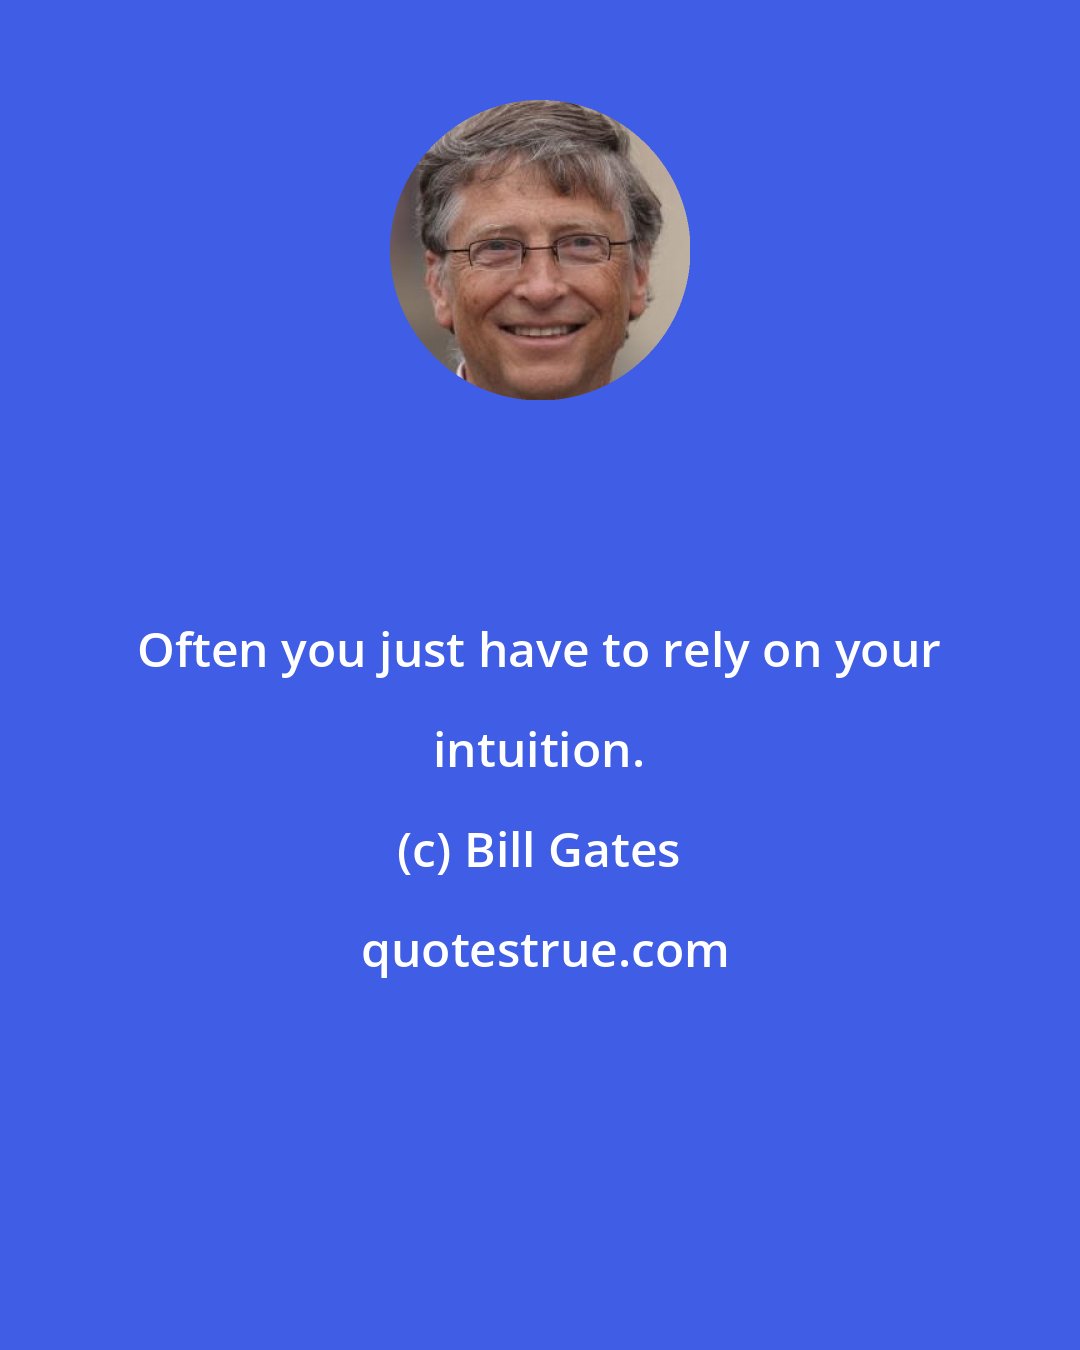 Bill Gates: Often you just have to rely on your intuition.